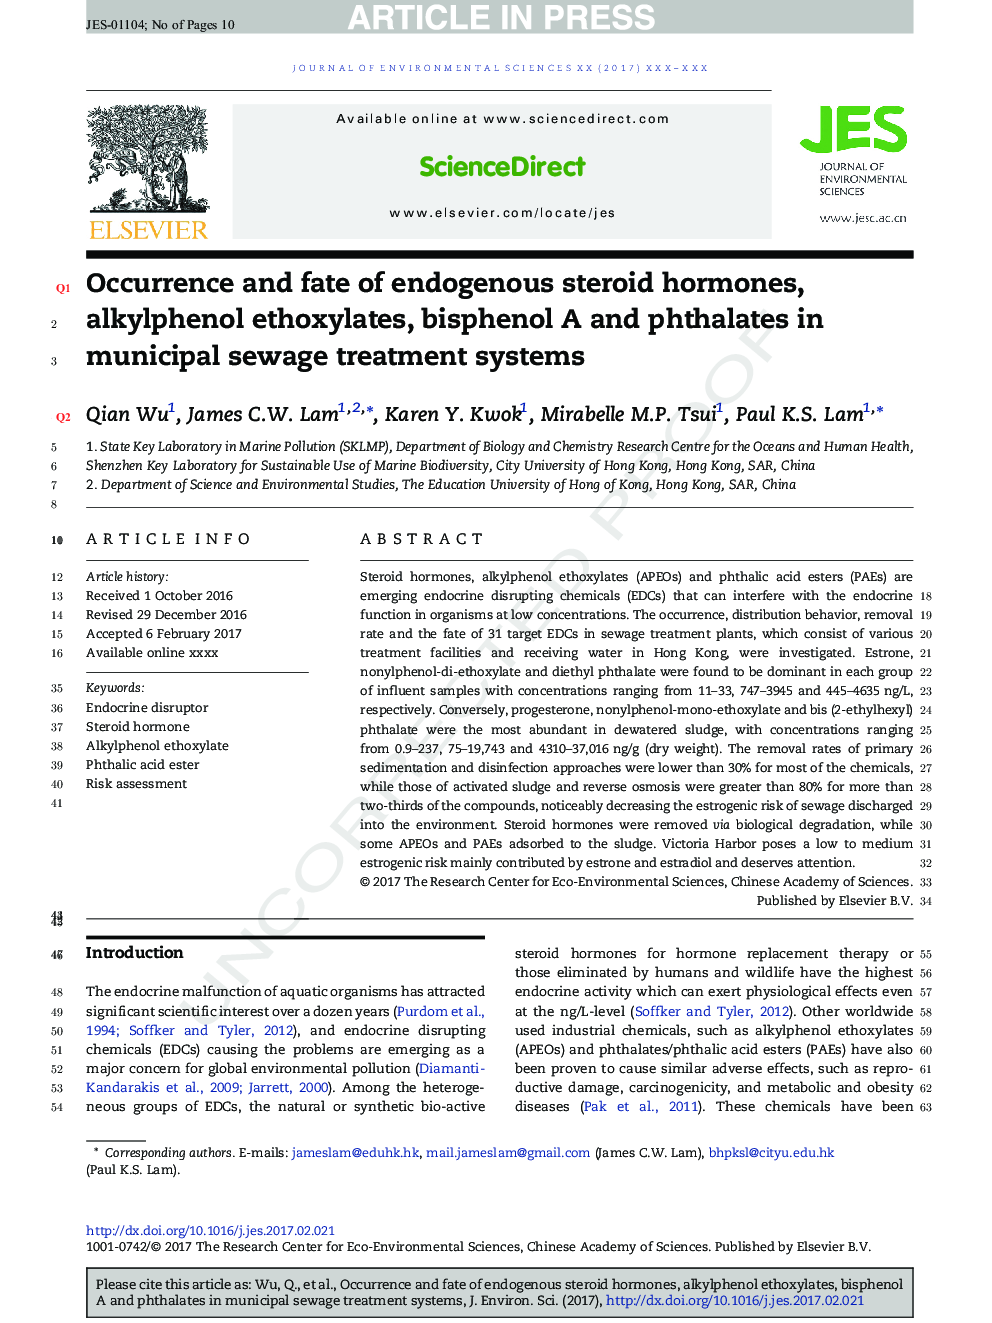 Occurrence and fate of endogenous steroid hormones, alkylphenol ethoxylates, bisphenol A and phthalates in municipal sewage treatment systems